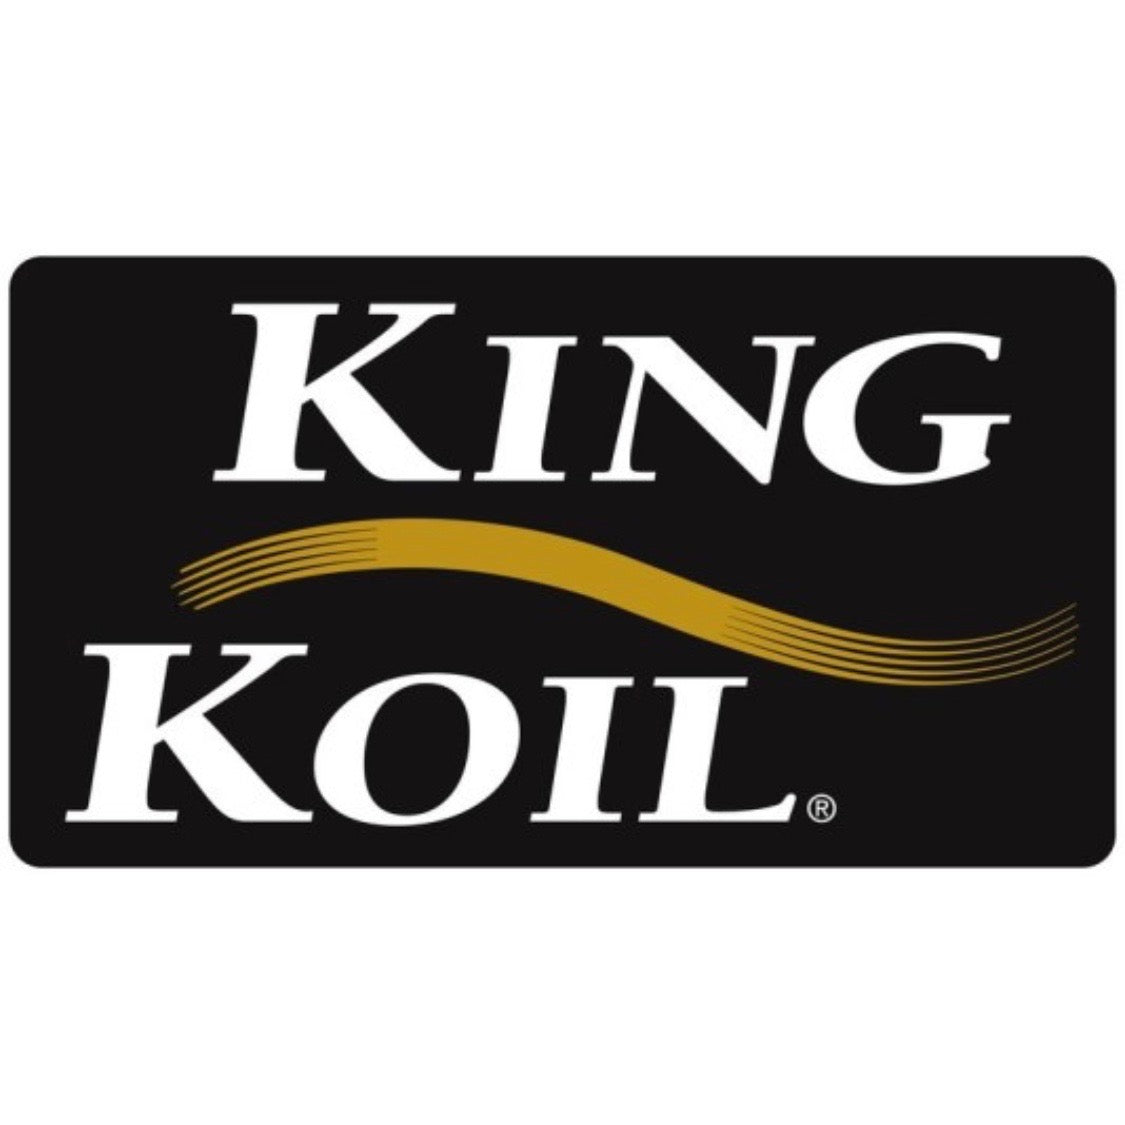 King Koil Spine Support™ Andrew Eurotop Mattress - FACTORY SPECIAL